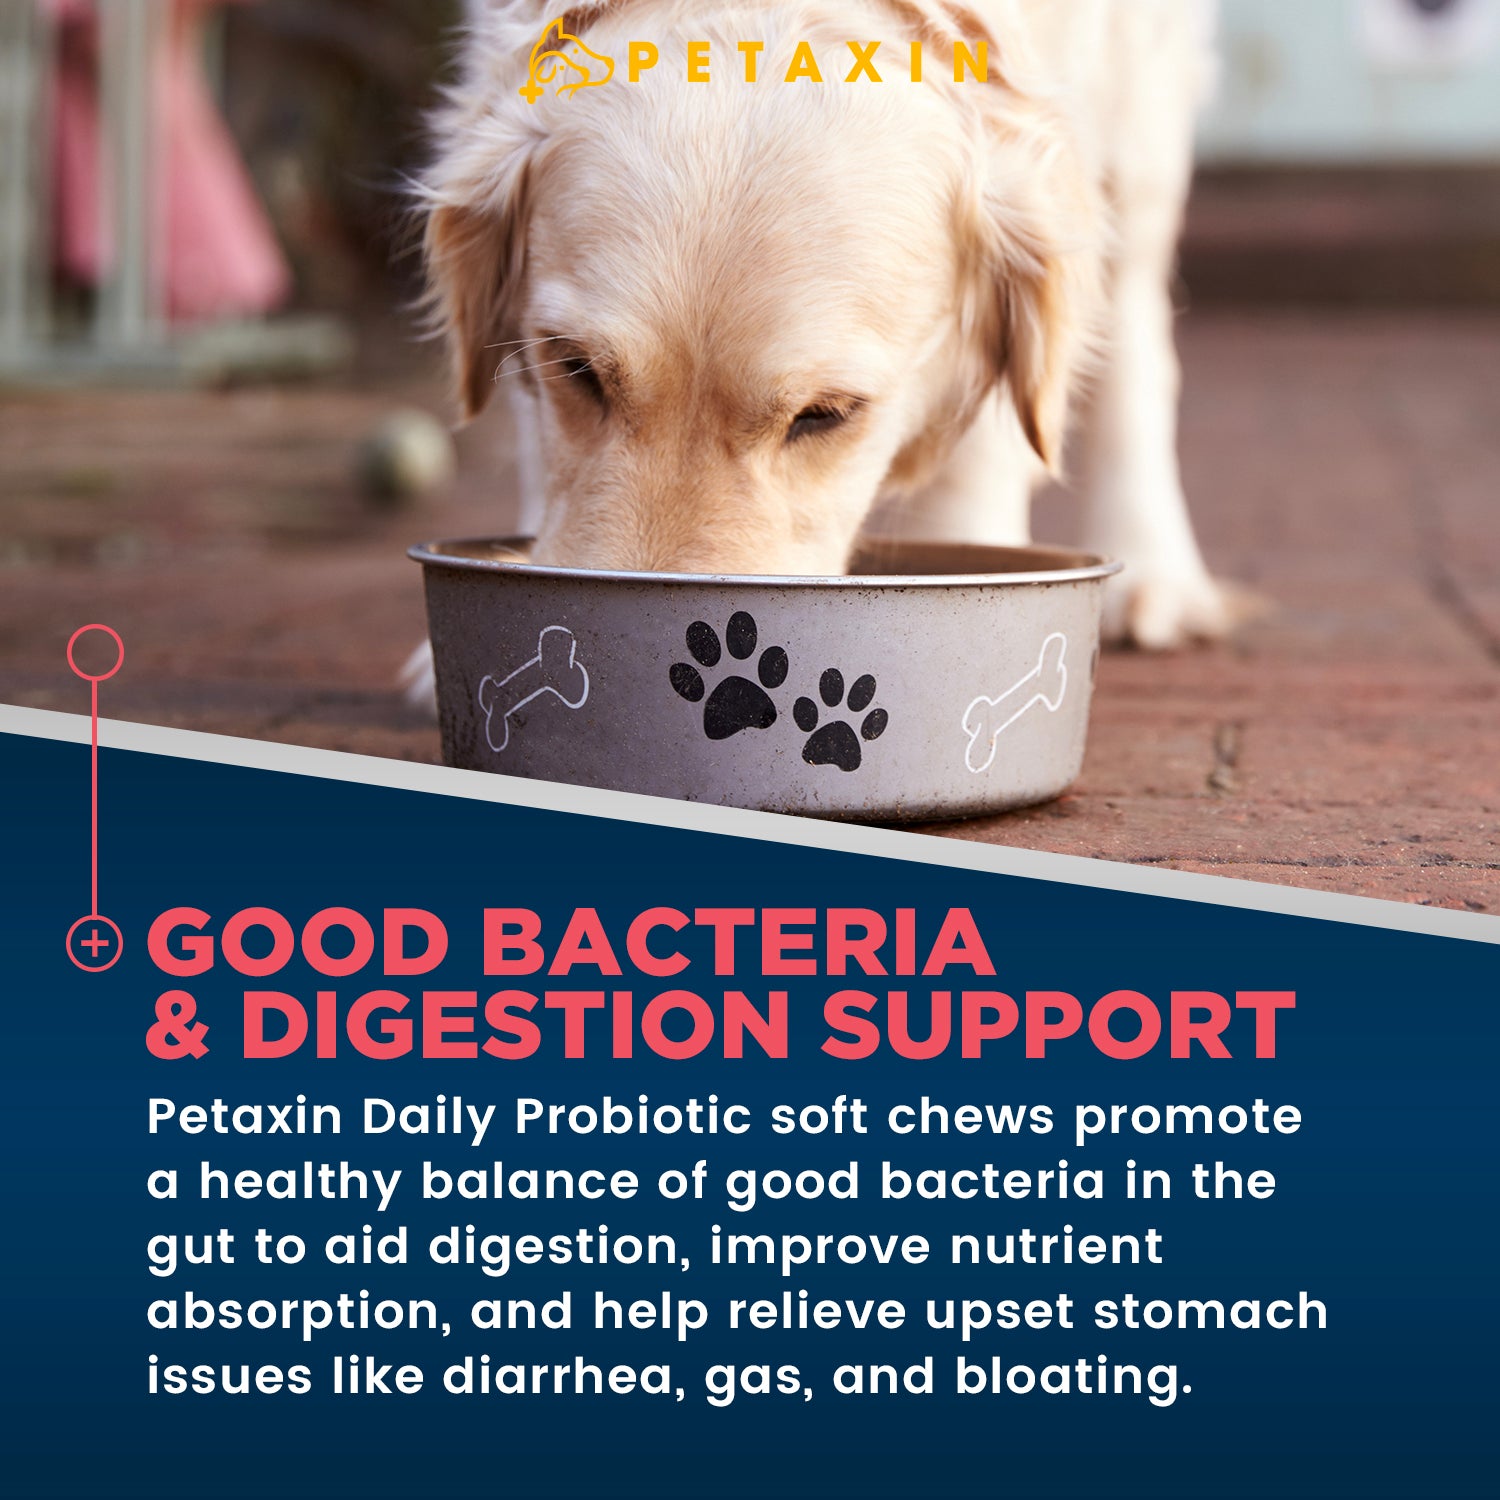 Petaxin Daily Probiotic